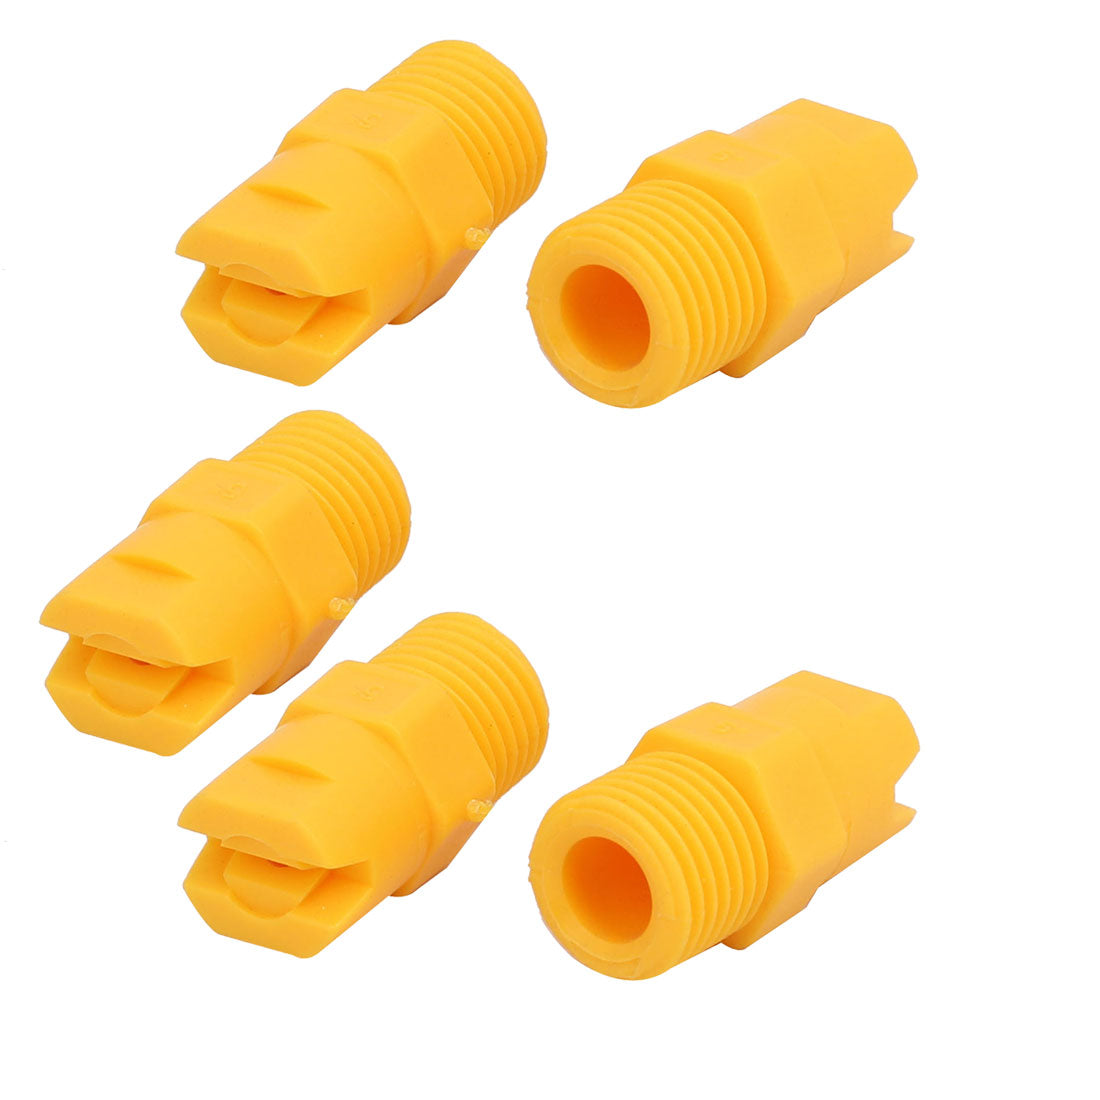 uxcell Uxcell 1/4PT Male Inlet 65 Degree Standard Flat Fan Spray Tip Yellow 5pcs